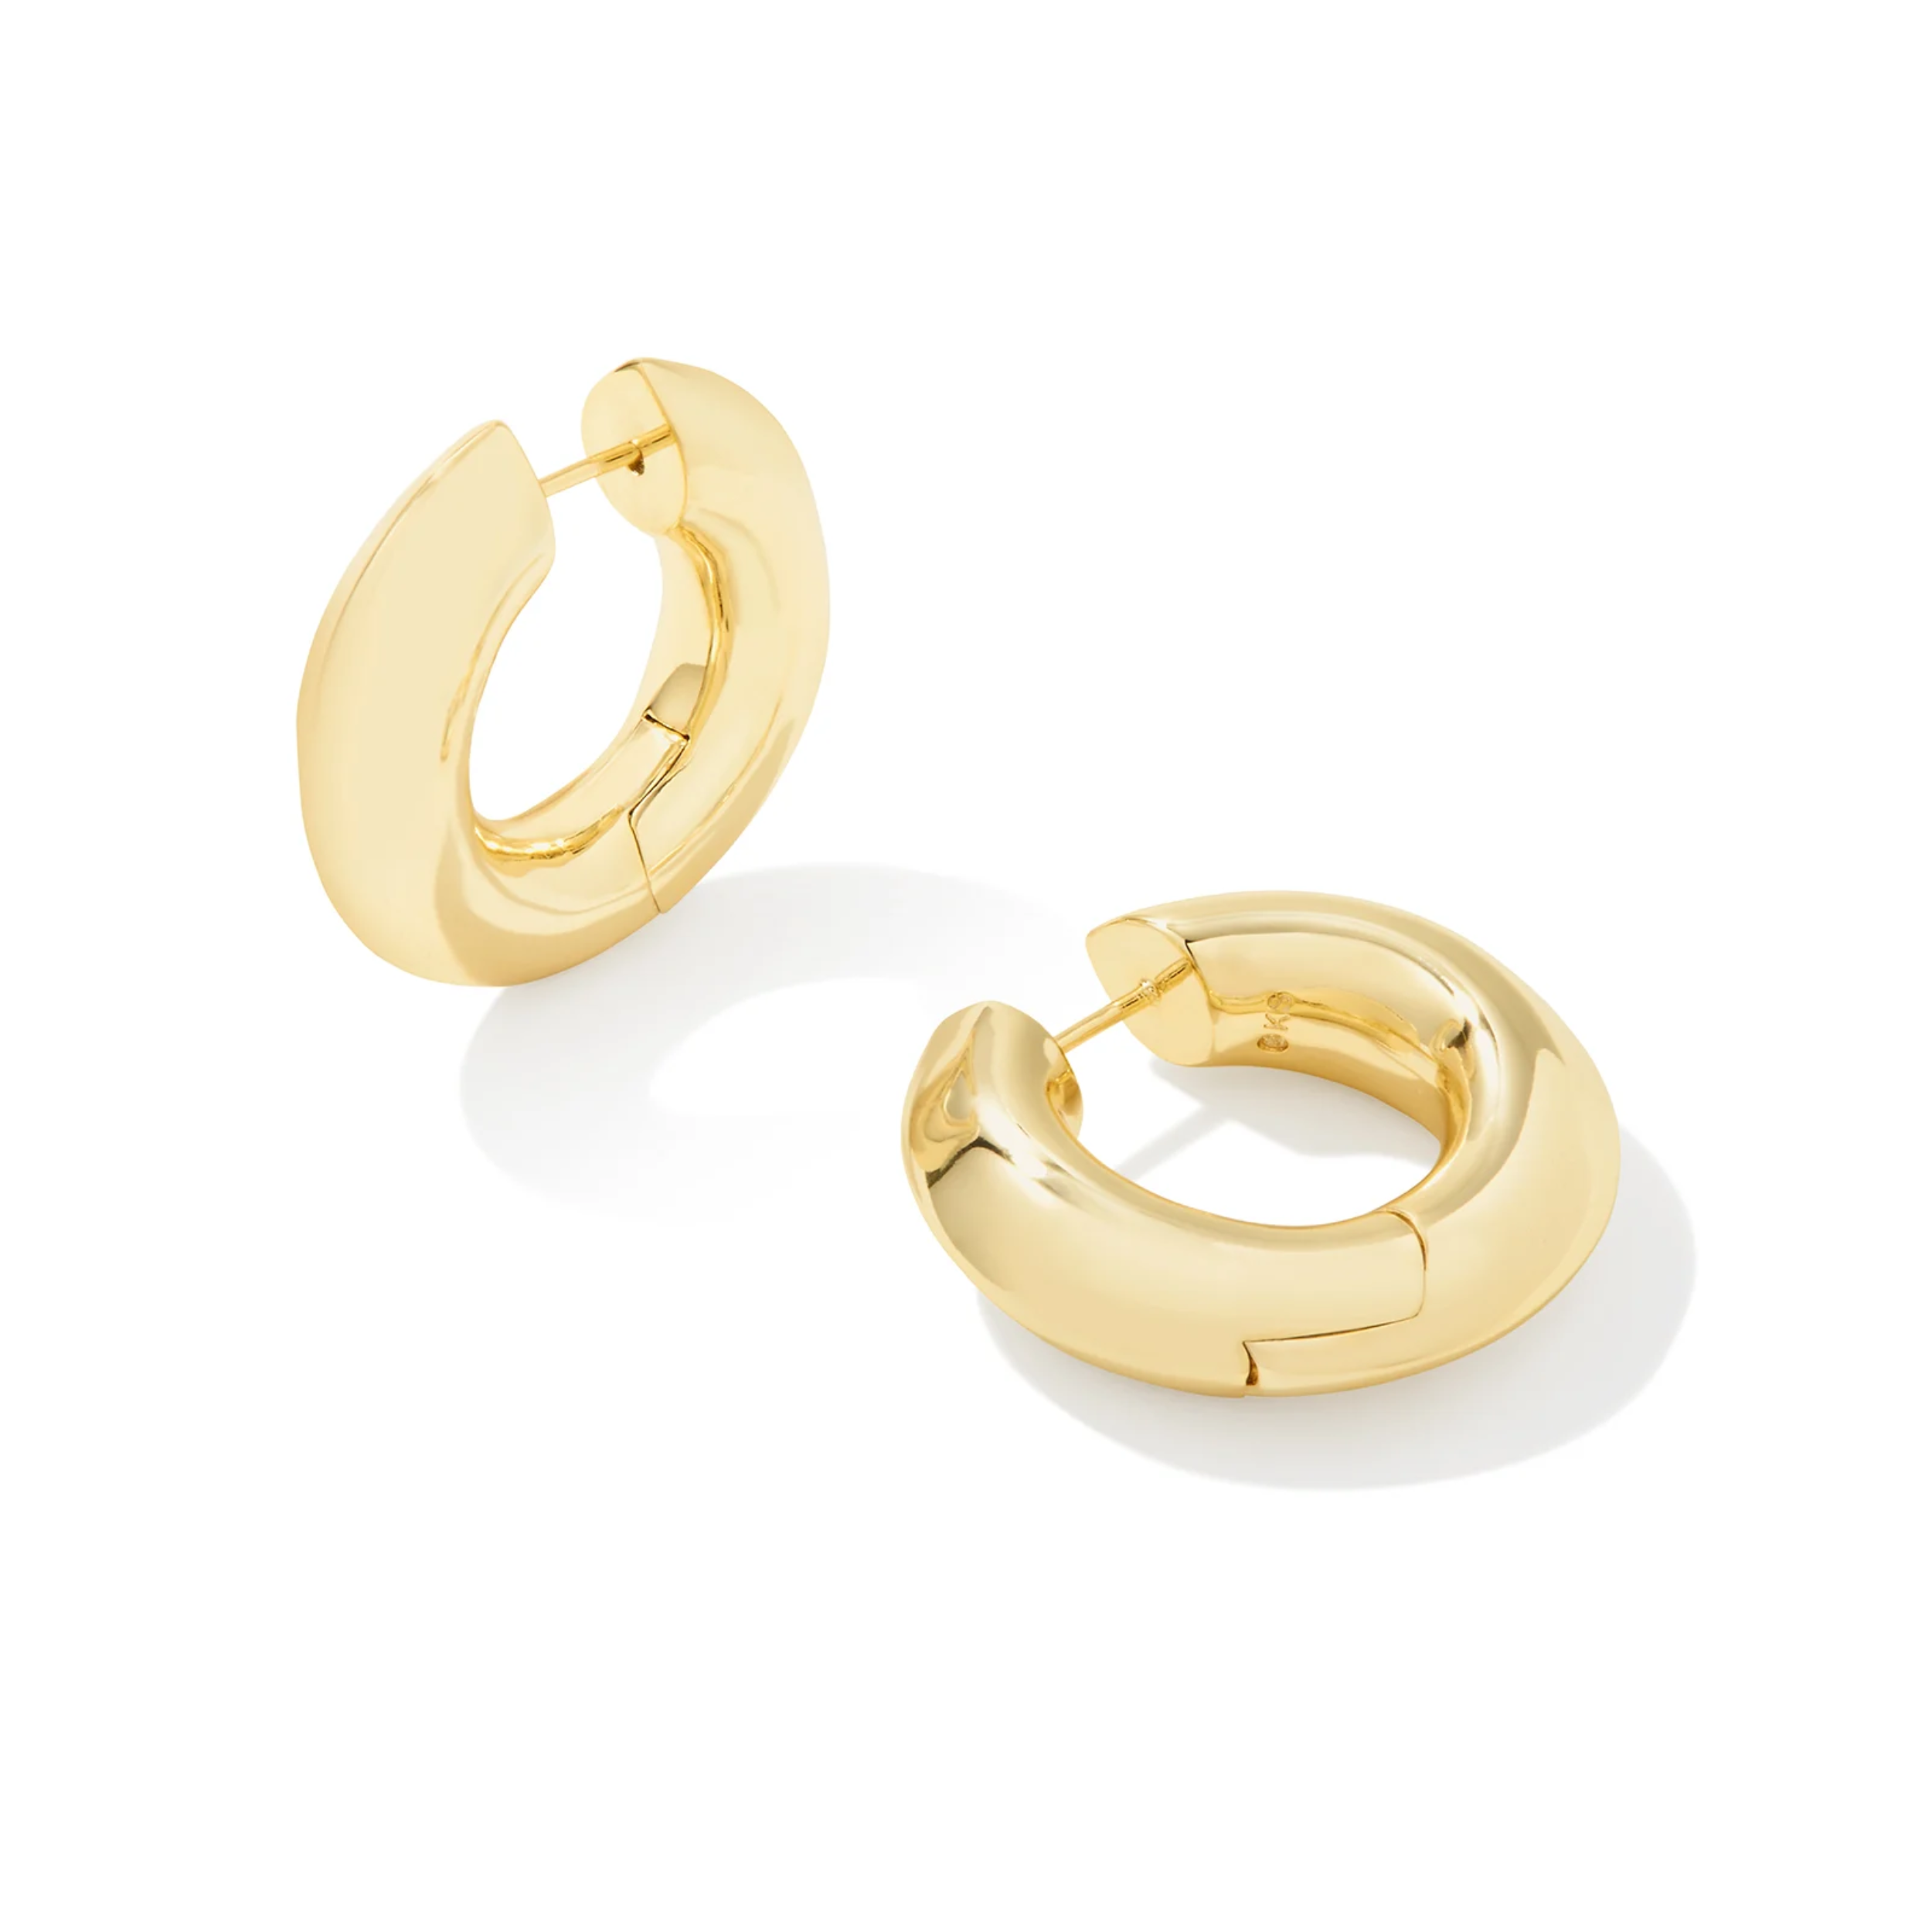 These Mikki Gold Metal Hoop Earrings in Polished Metal by Kendra Scott are pictured on a white background.